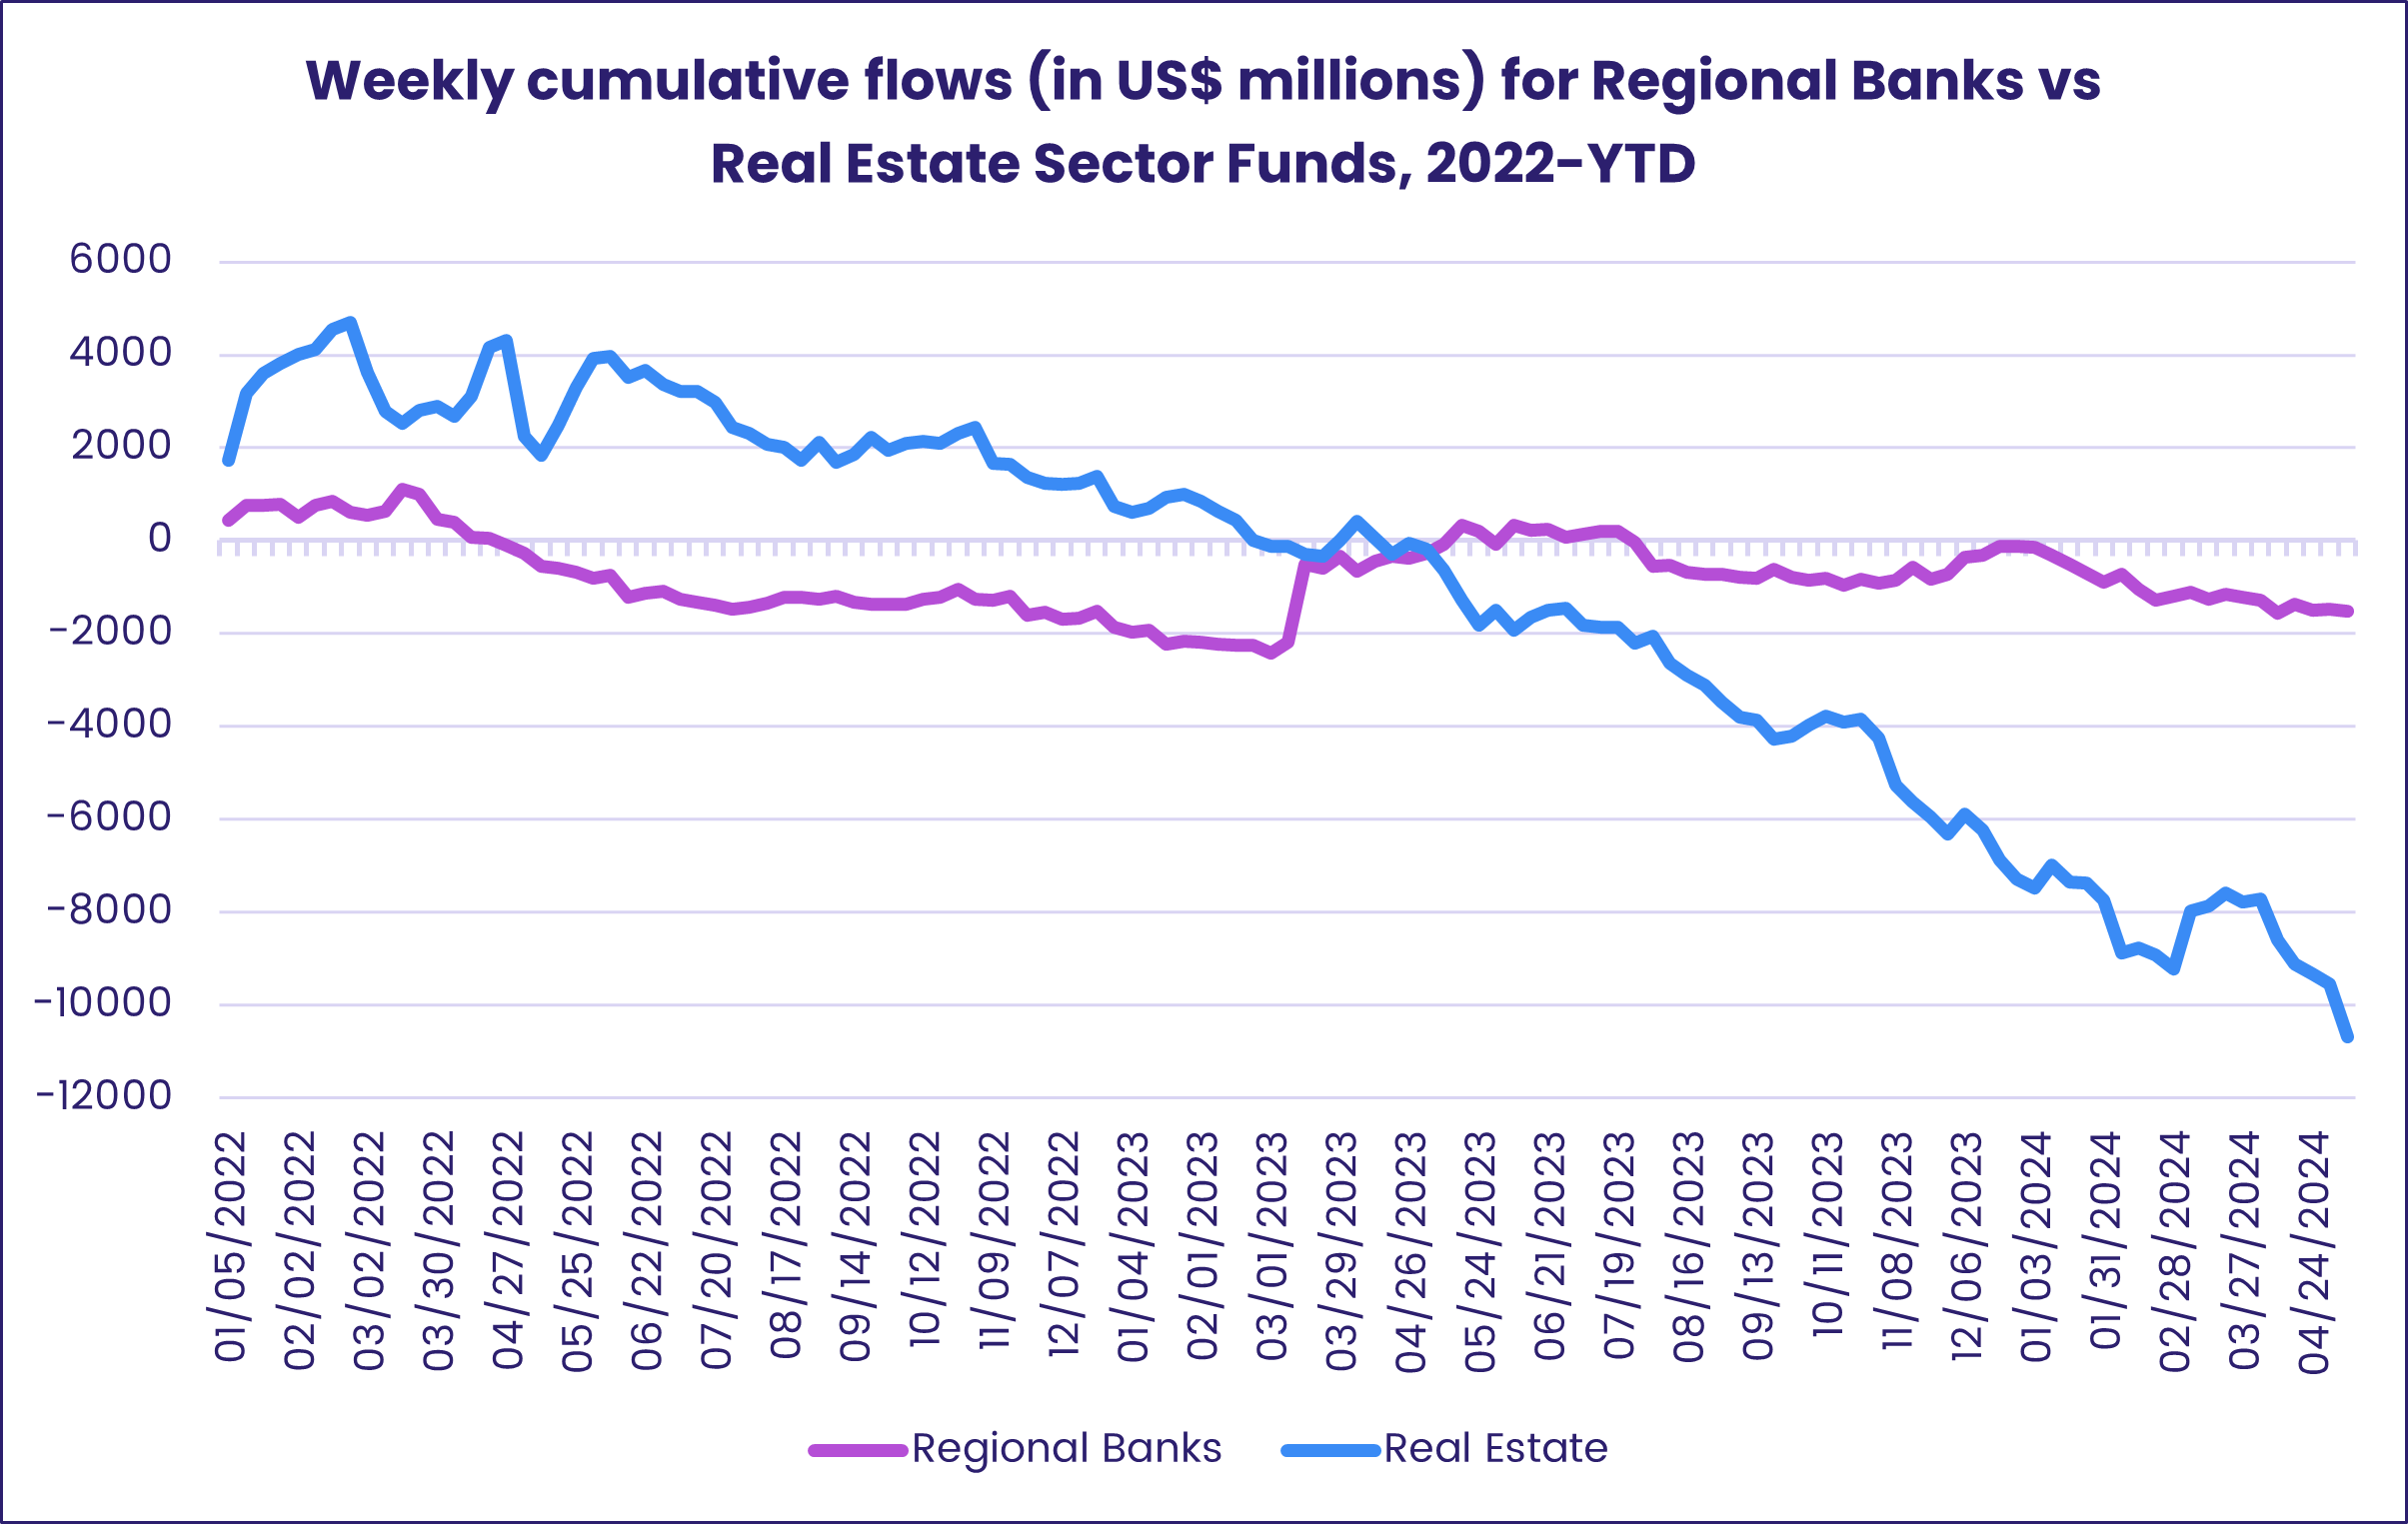 Chart representing 'Weekly cumulative flows (in US$ millions) for Regional Banks vs Real Estate Sector Funds, 2022-YTD'